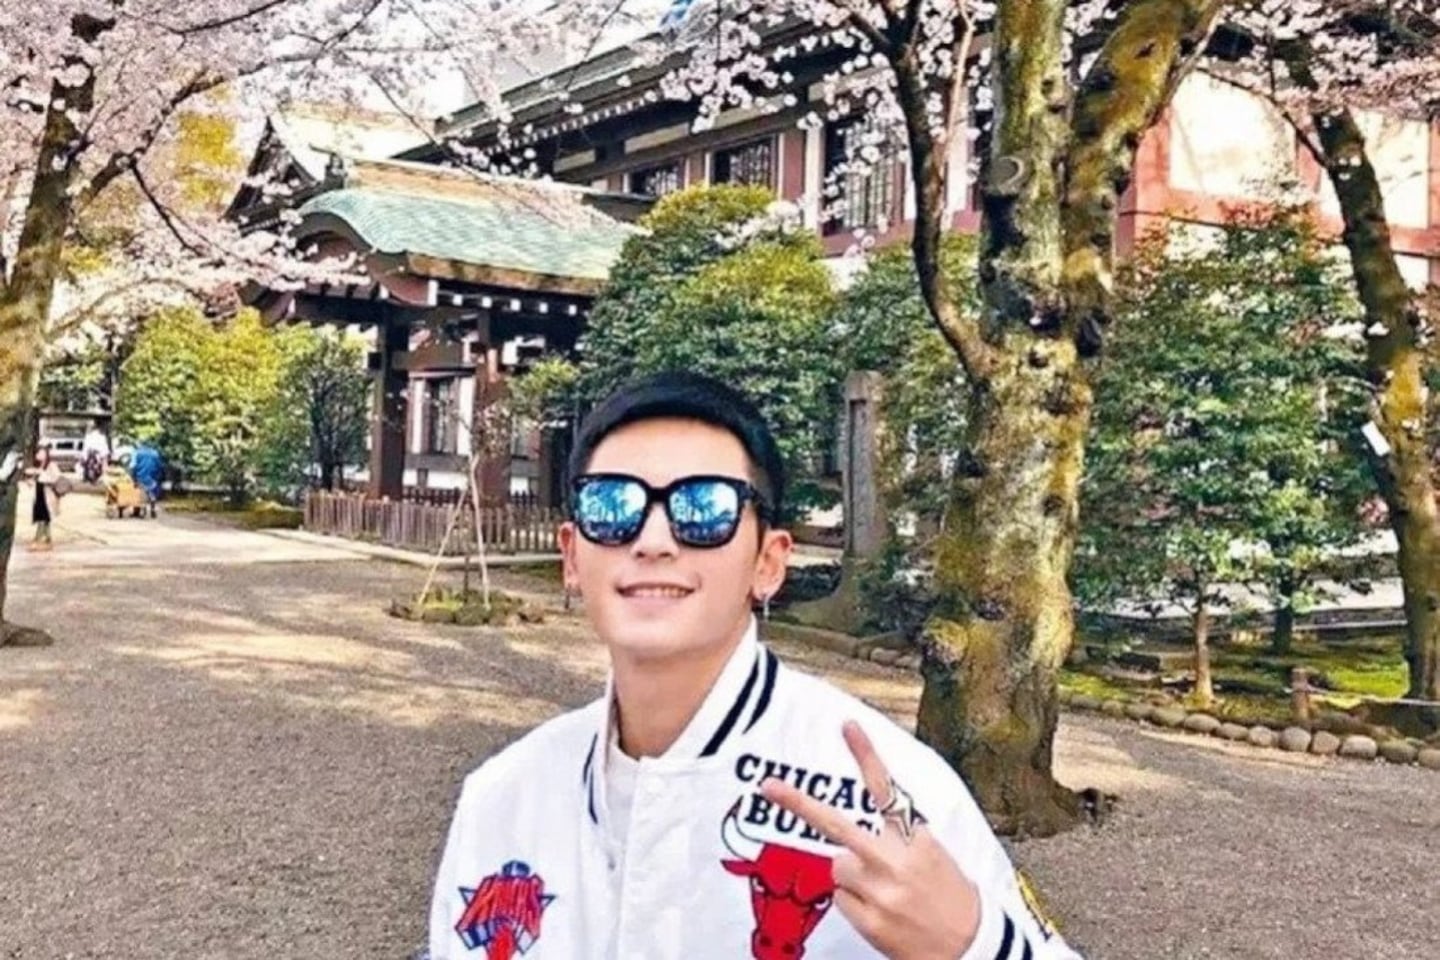 Photos of Zhang Zhehan in front of the shrine, taken in 2018, have stirred controversy. Weibo